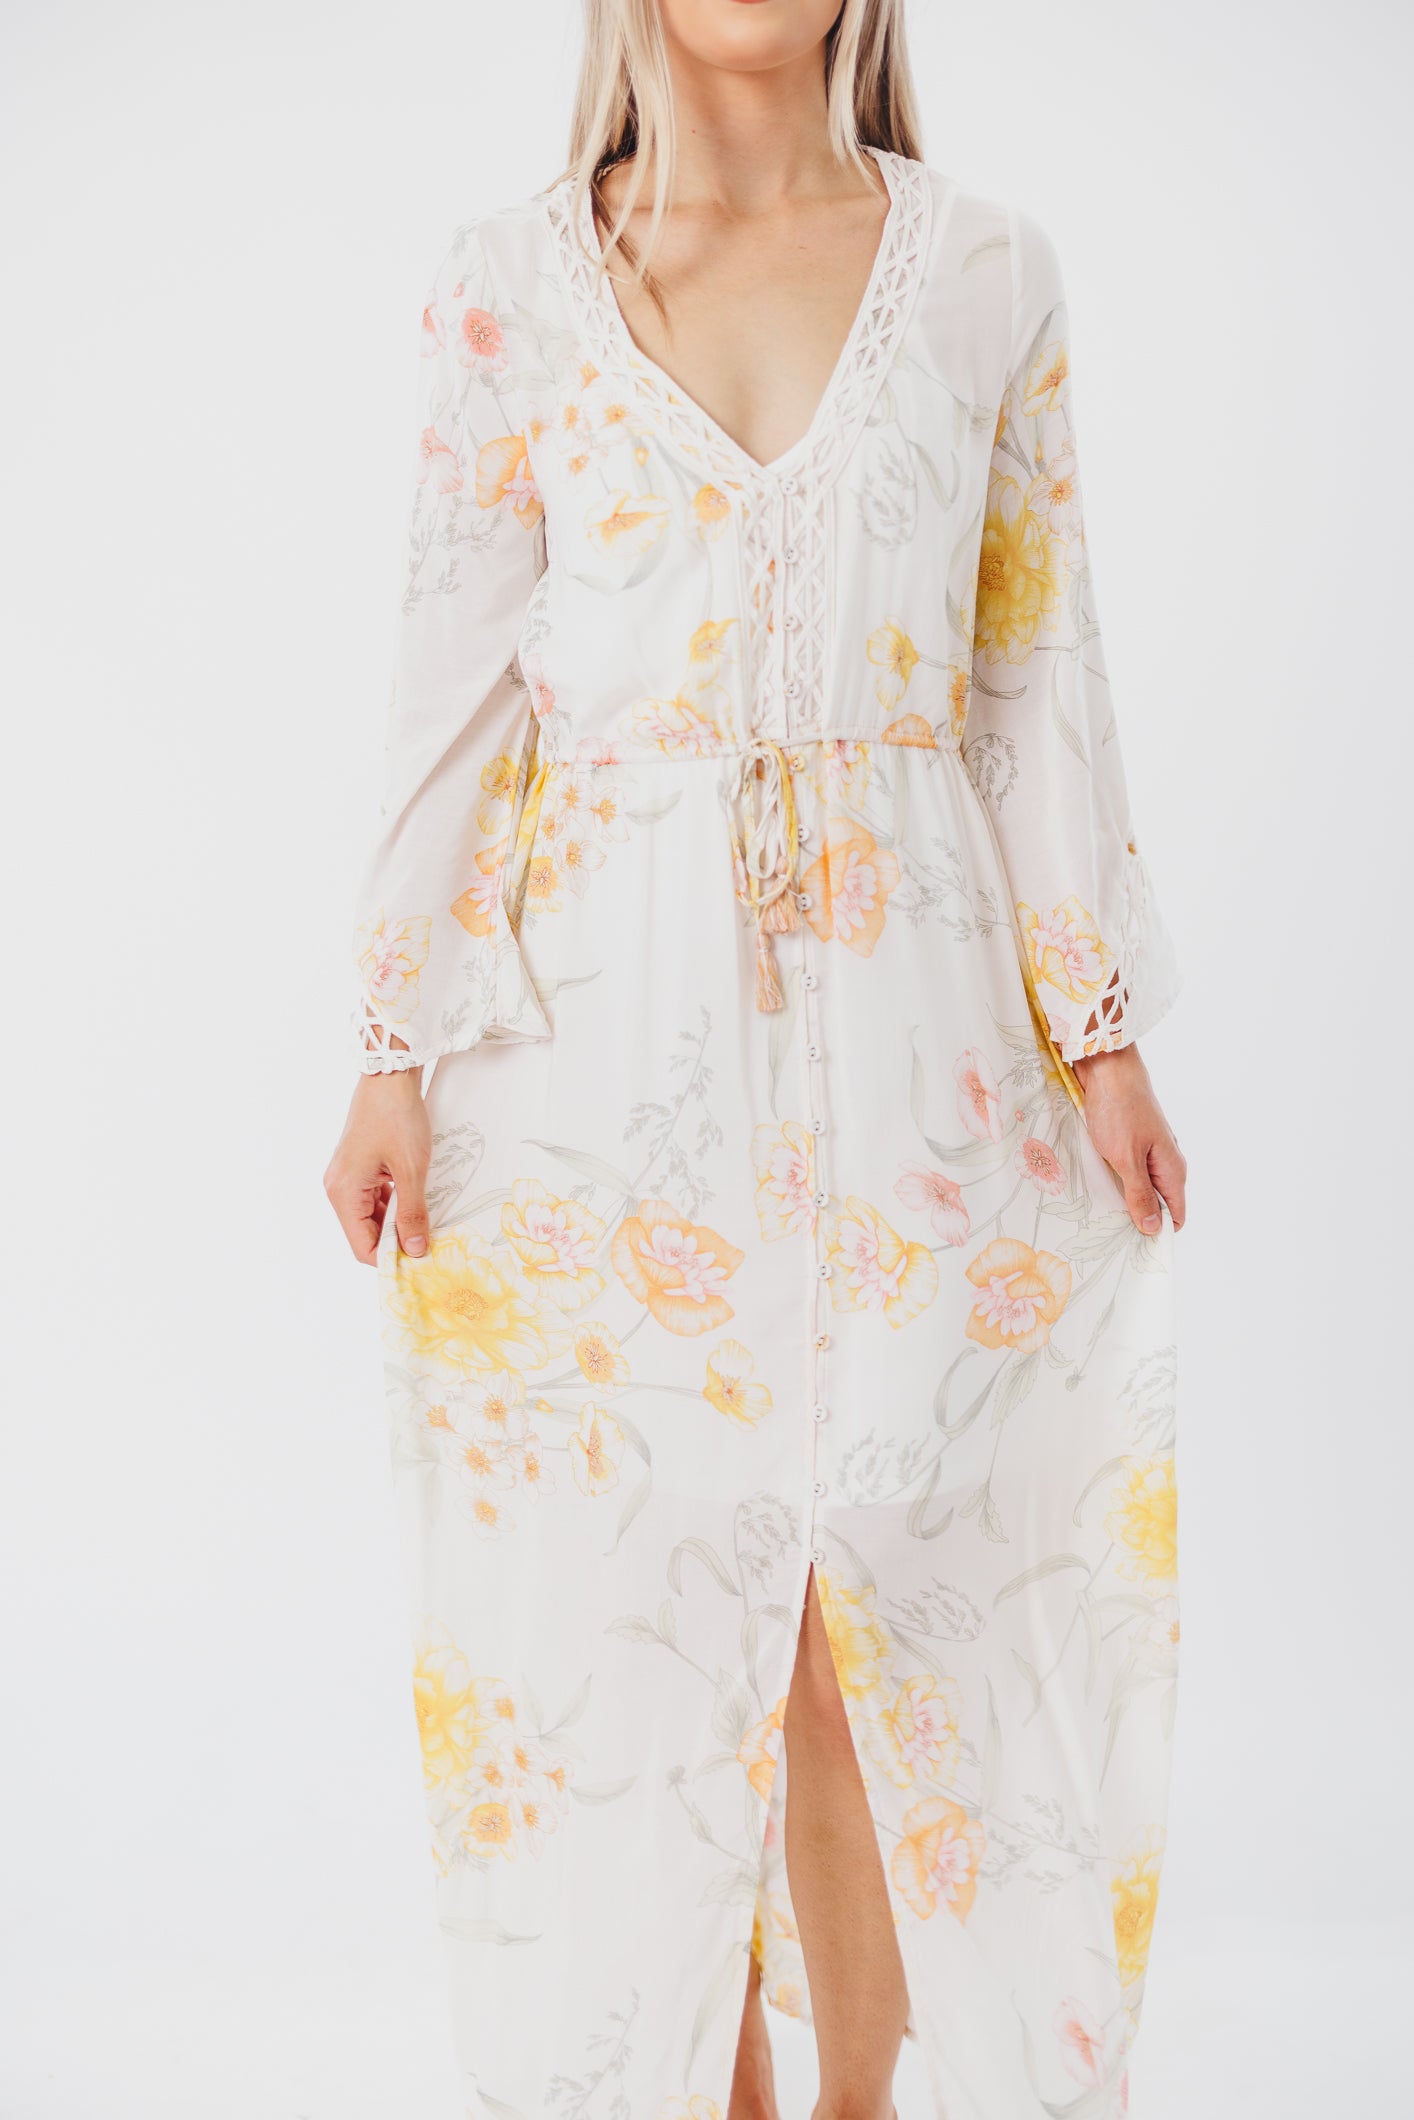 Sophie Flowy Long-sleeved Maxi Dress with Button-Up Front in Vanilla/Coral Floral - Nursing Friendly